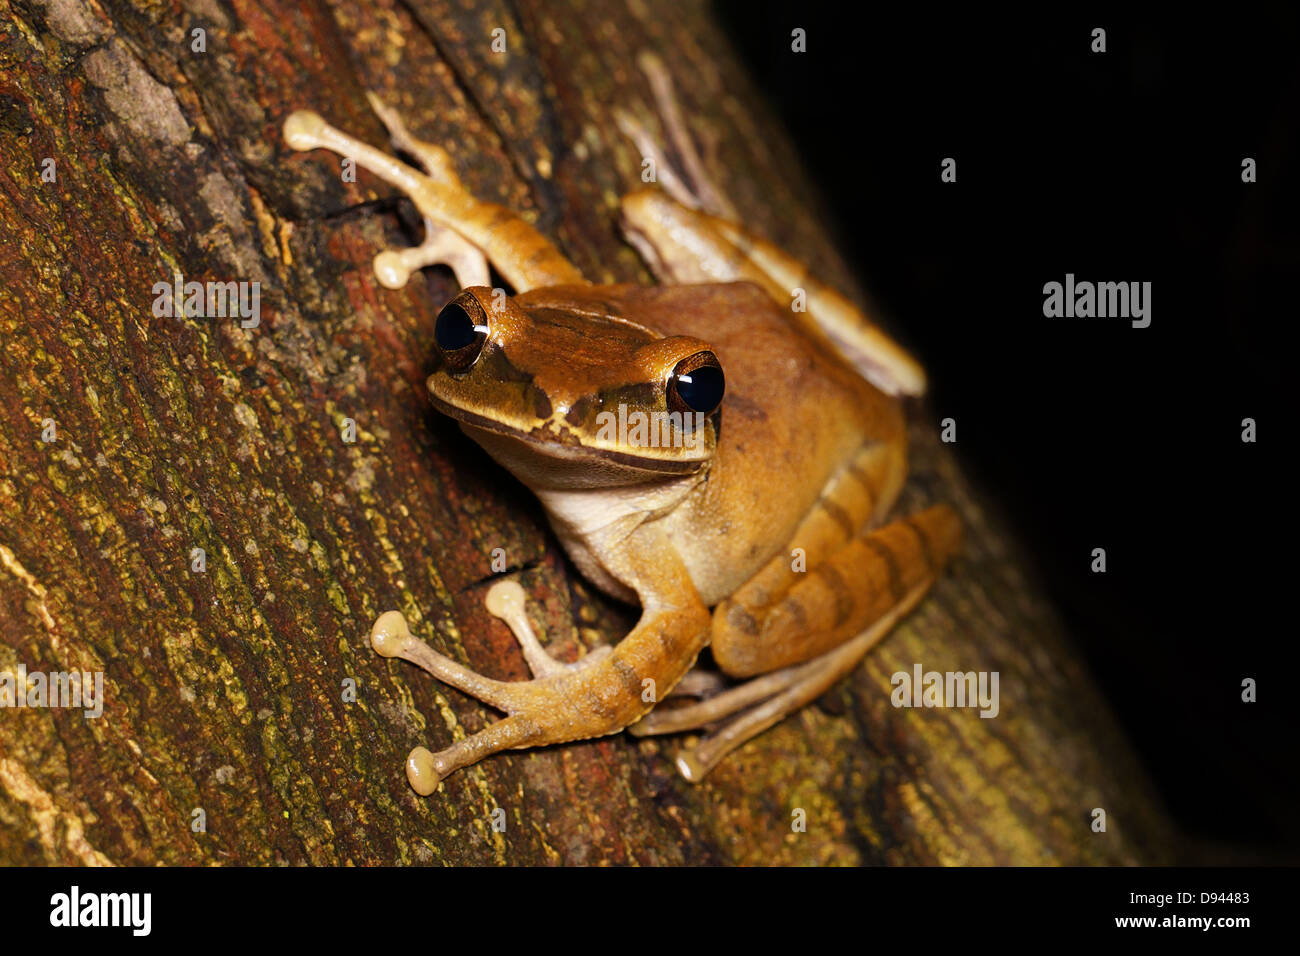 Brown tree frog Polypedates megacephalus in New Territories, Hong Kong Stock Photo